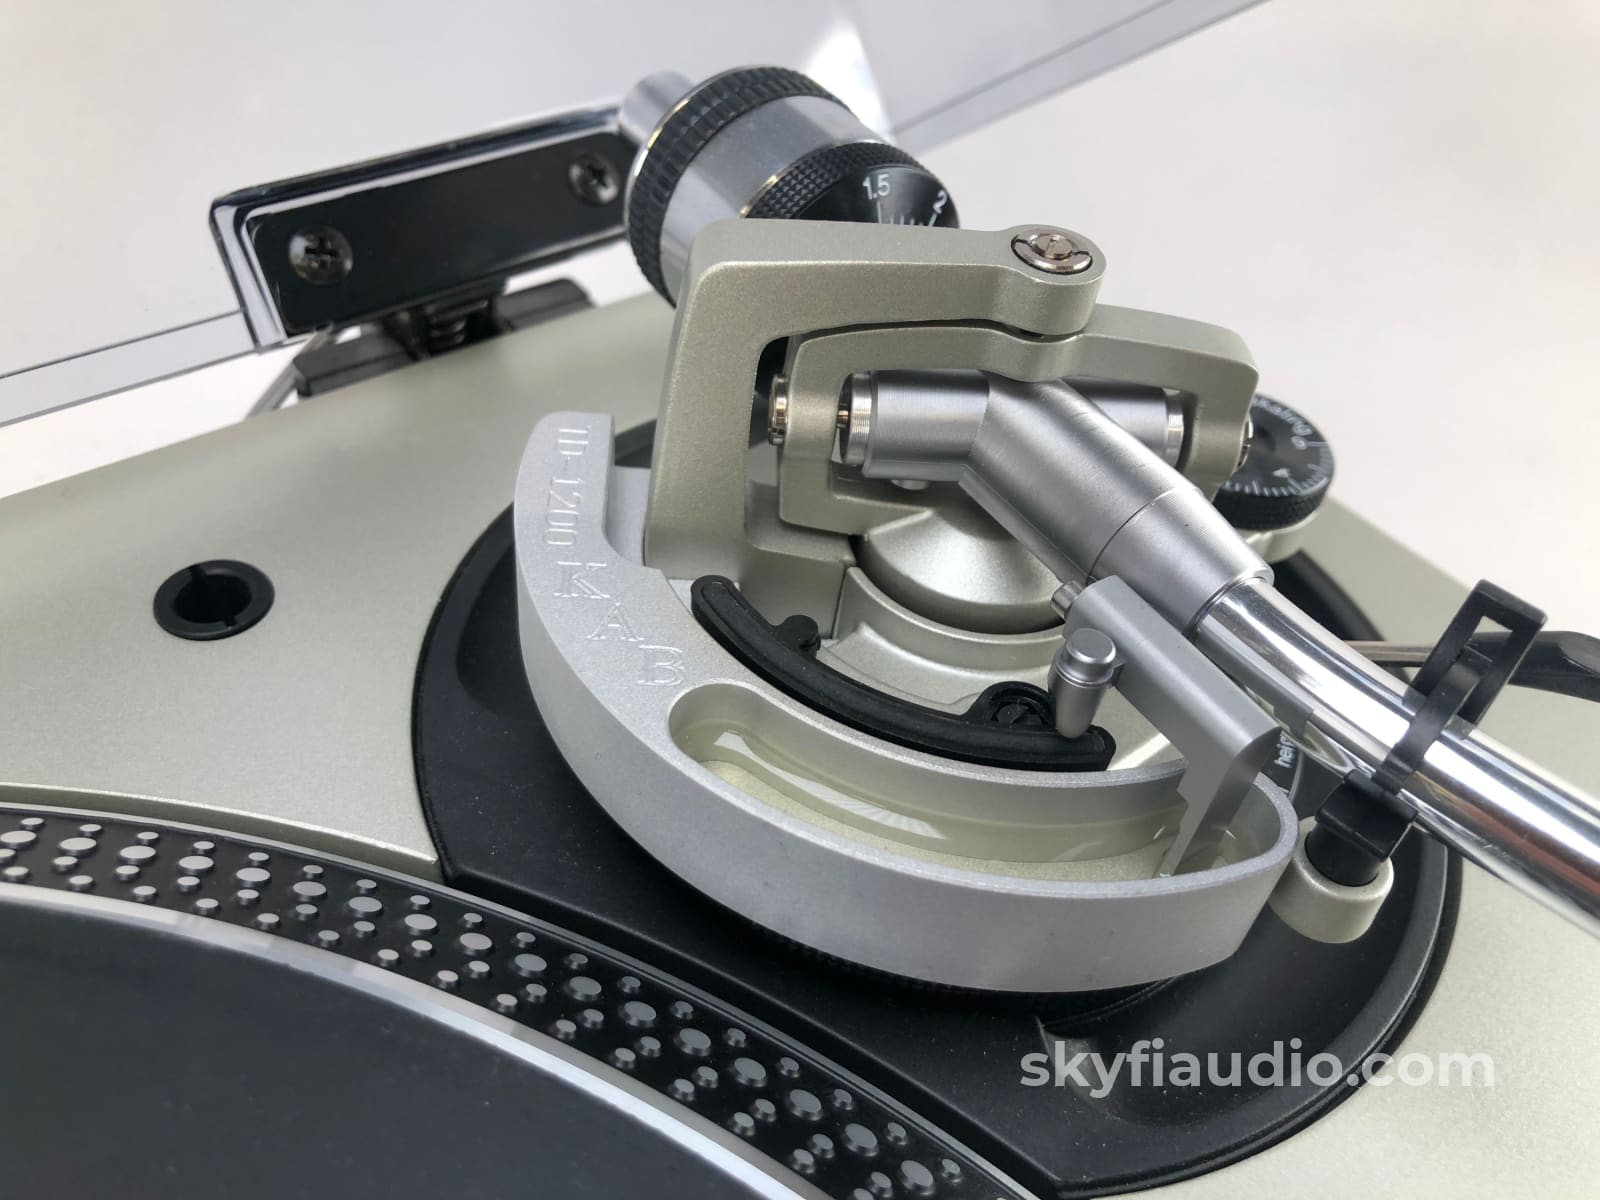 Kab Electro-Acoustics / Technics Sl-1200Mk5 Audiophile Standard Turntable - Direct Drive And Highly